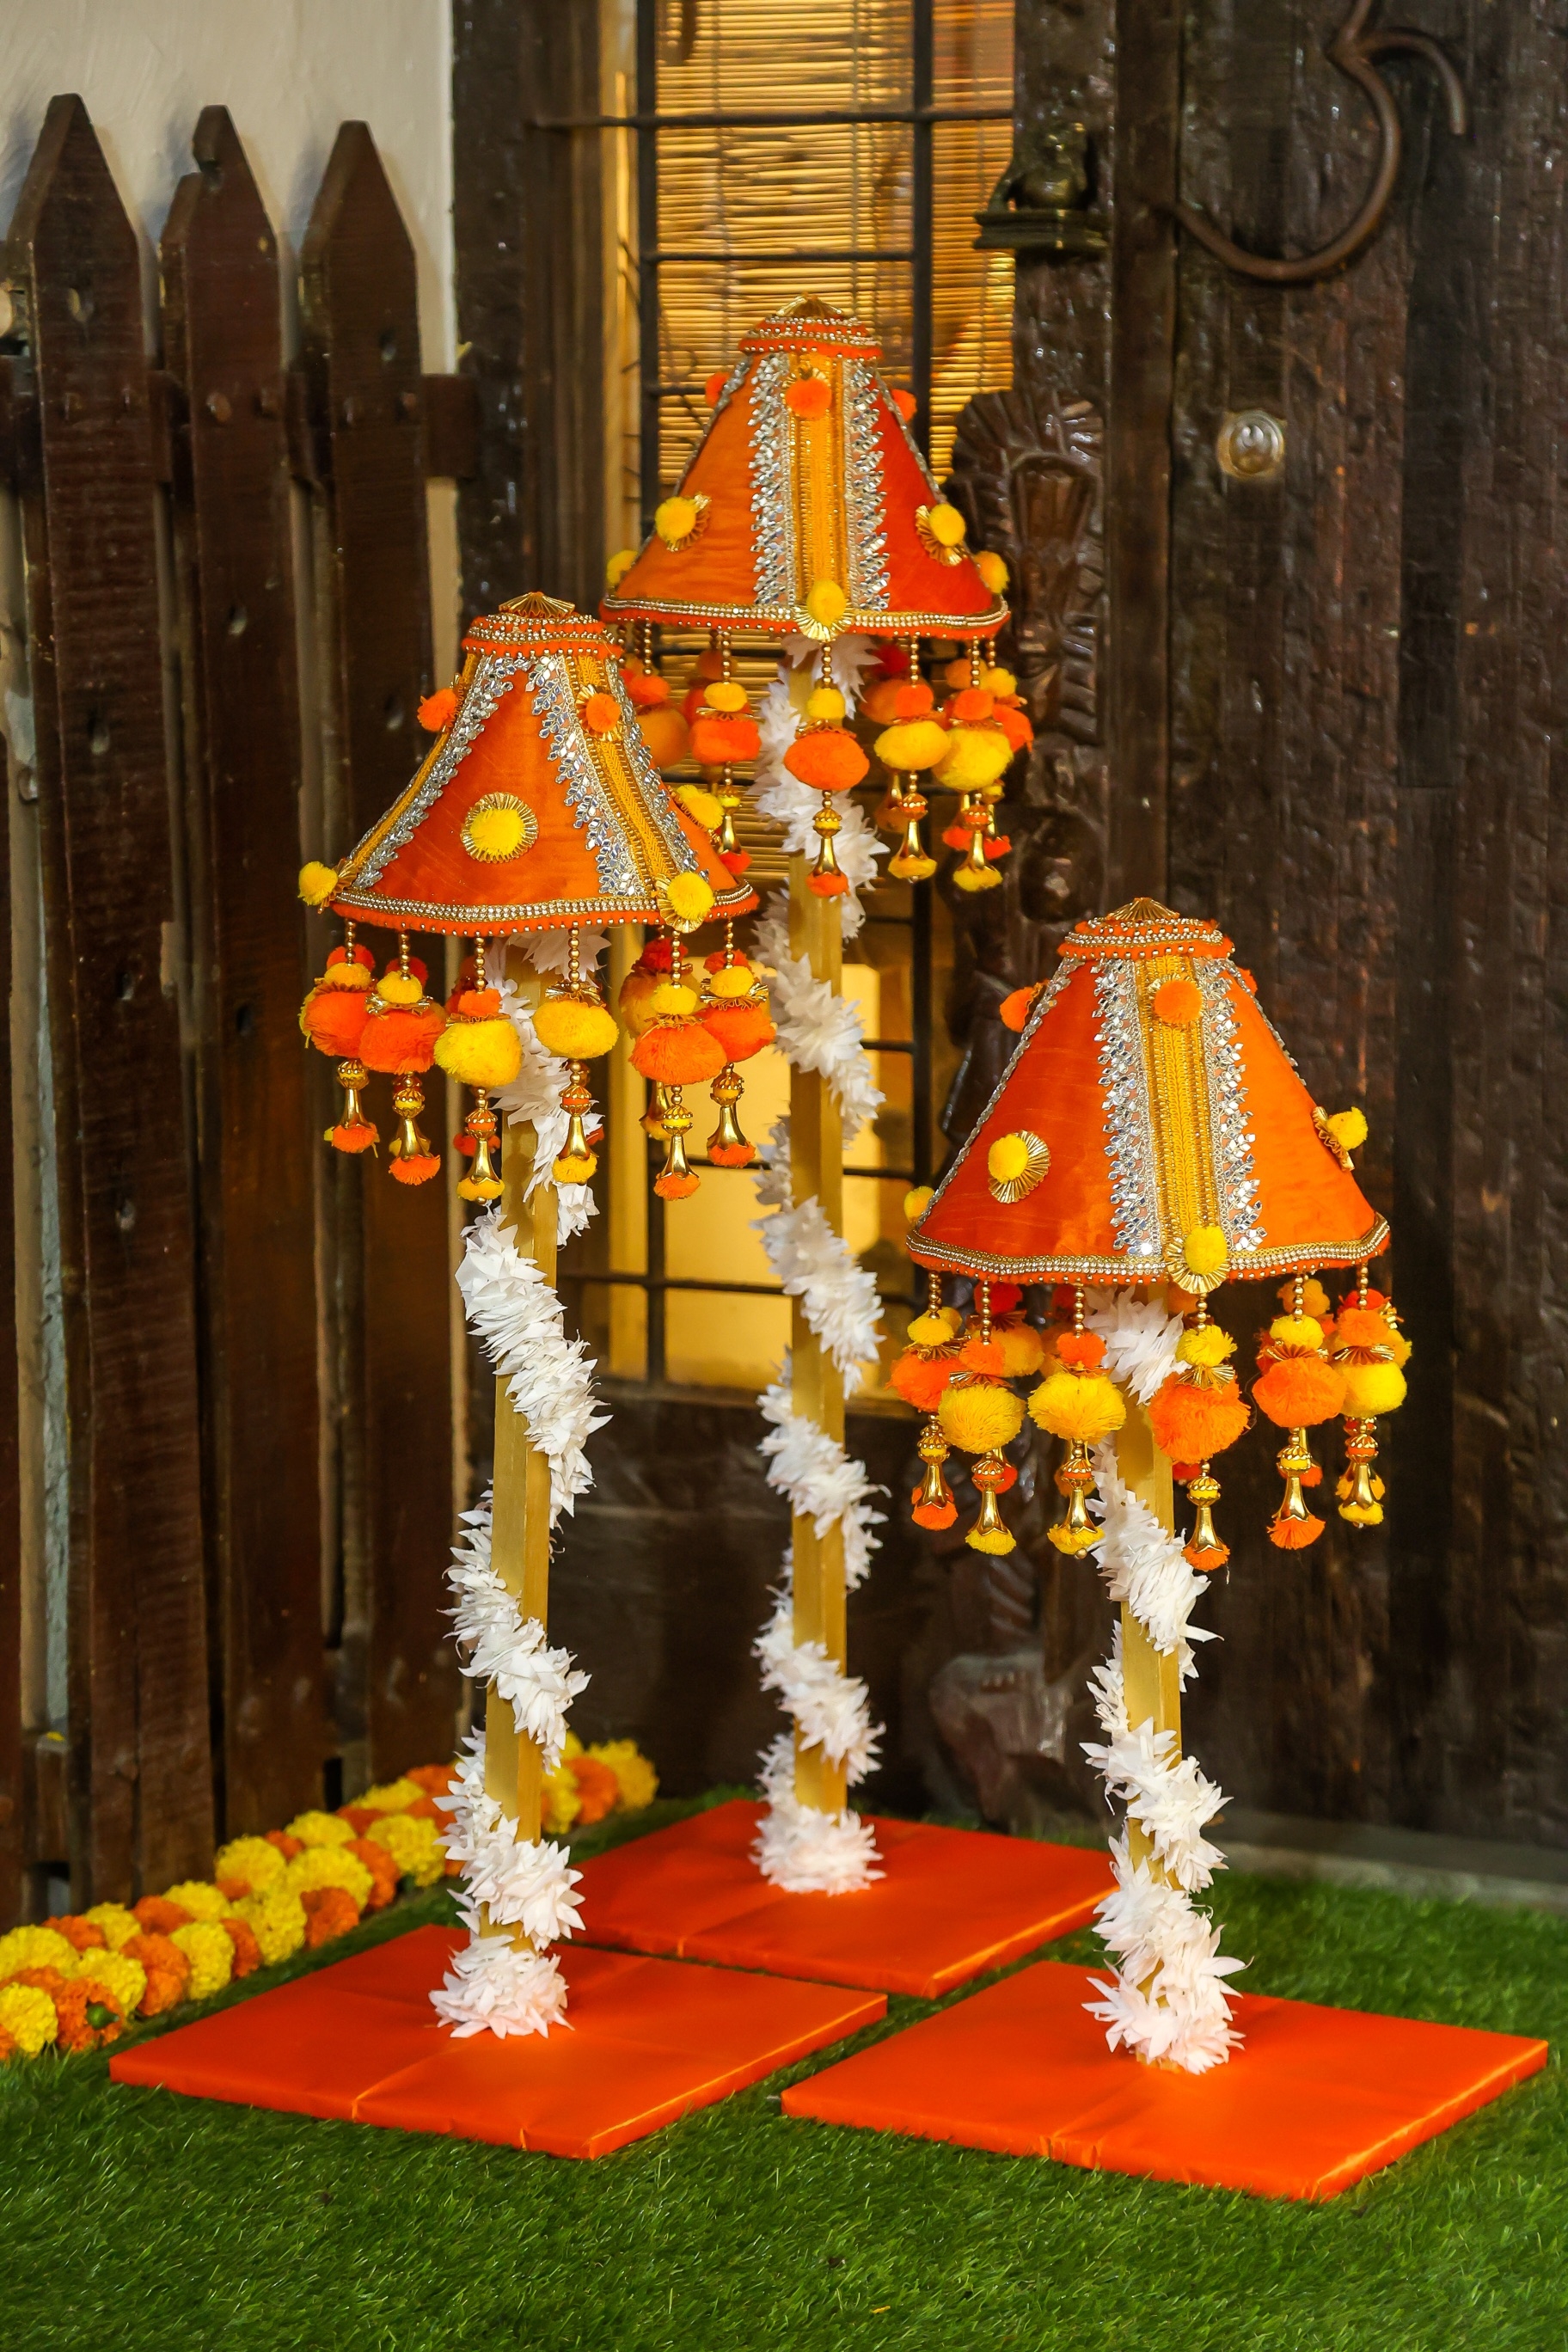 Floral art | ORANGE YELLOW POMPOM LAMPSHADE: undefined